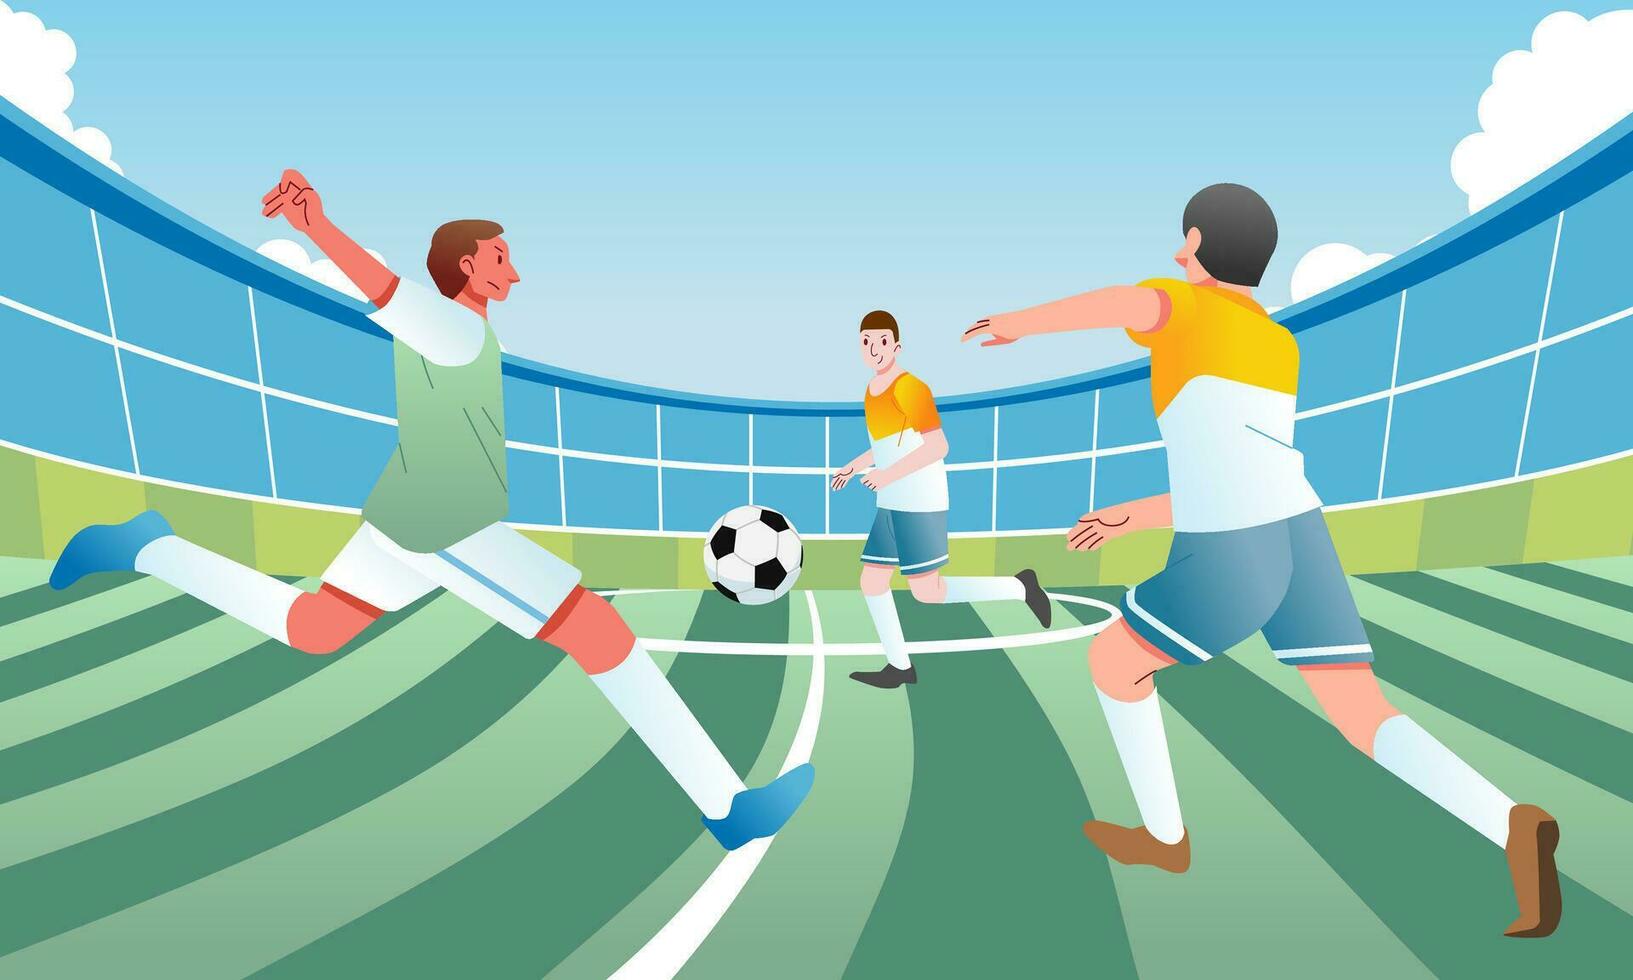 football match is in progress in the stadium, football players are playing in the field vector illustration